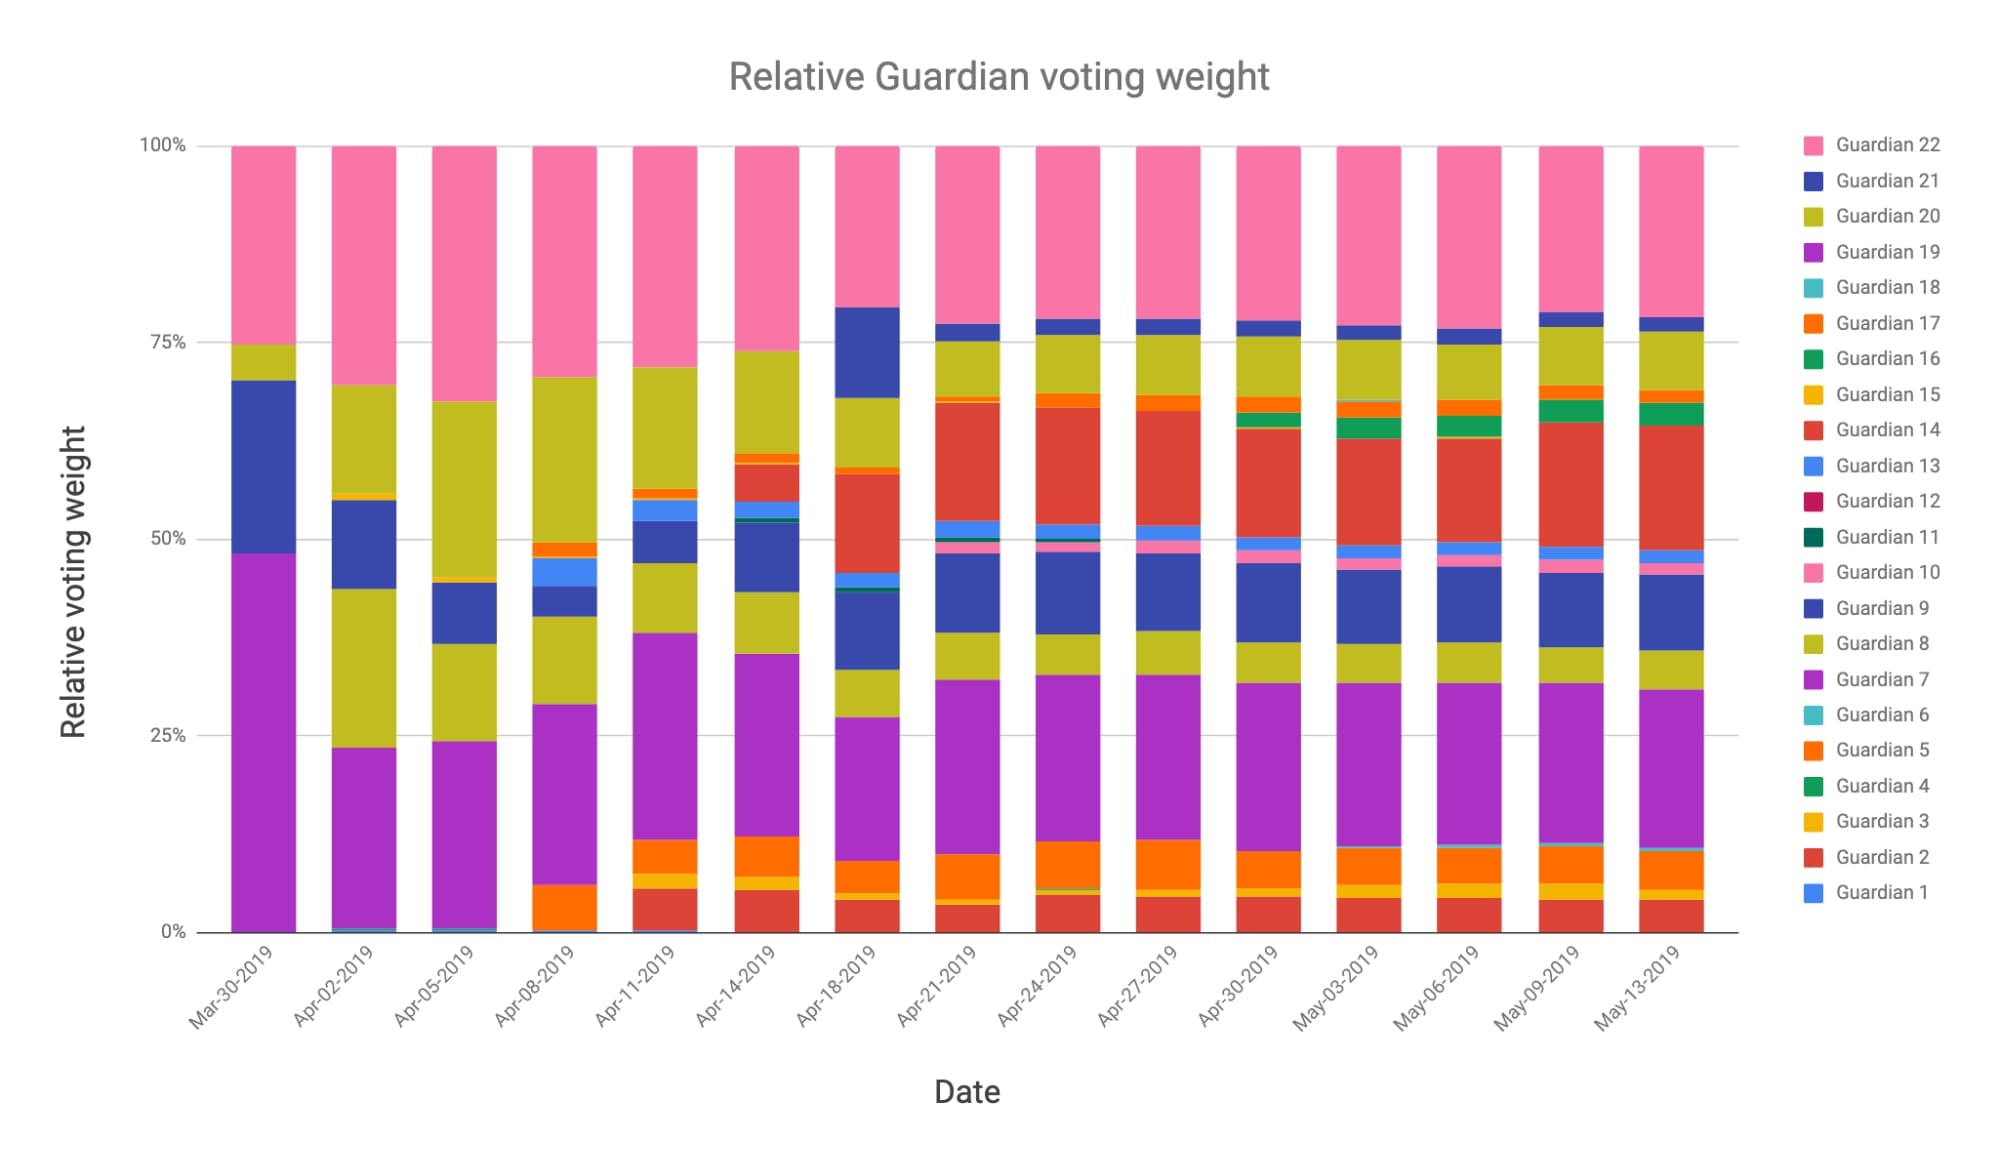 Figure 7 - Guardians voting weight over time 